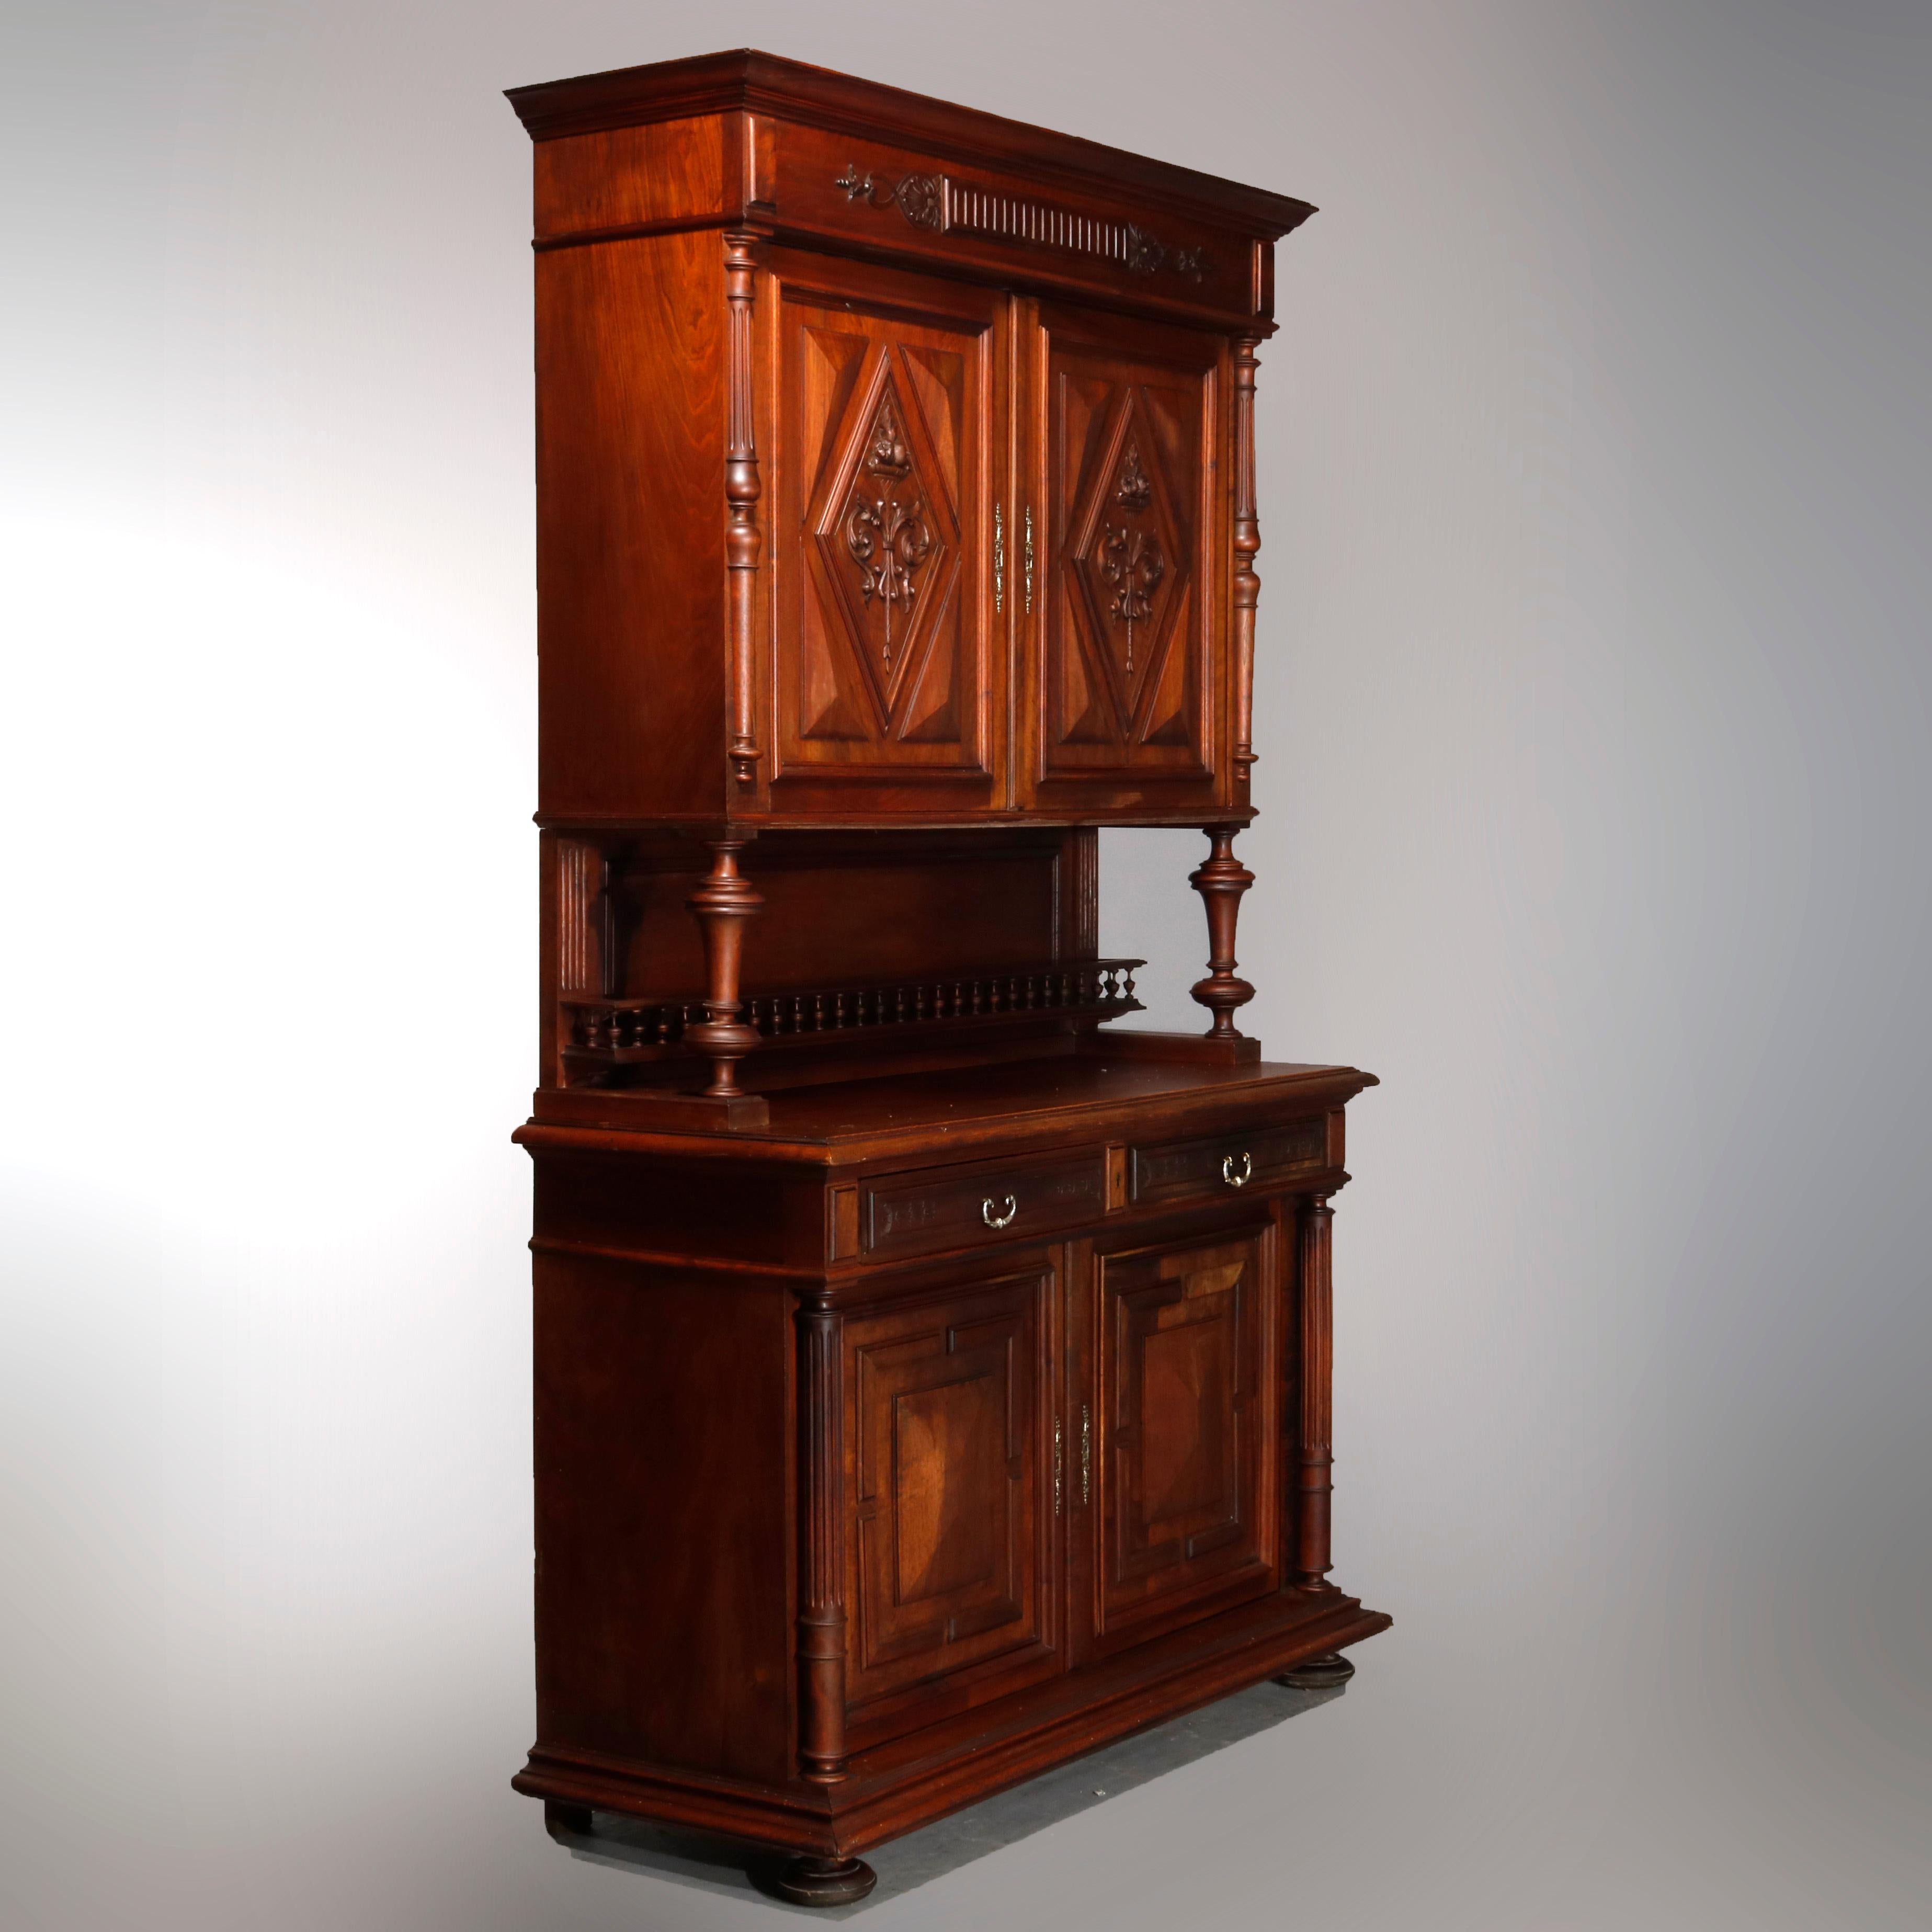 Antique French Renaissance Carved Walnut Cupboard with Torchieres, 19th Century For Sale 4